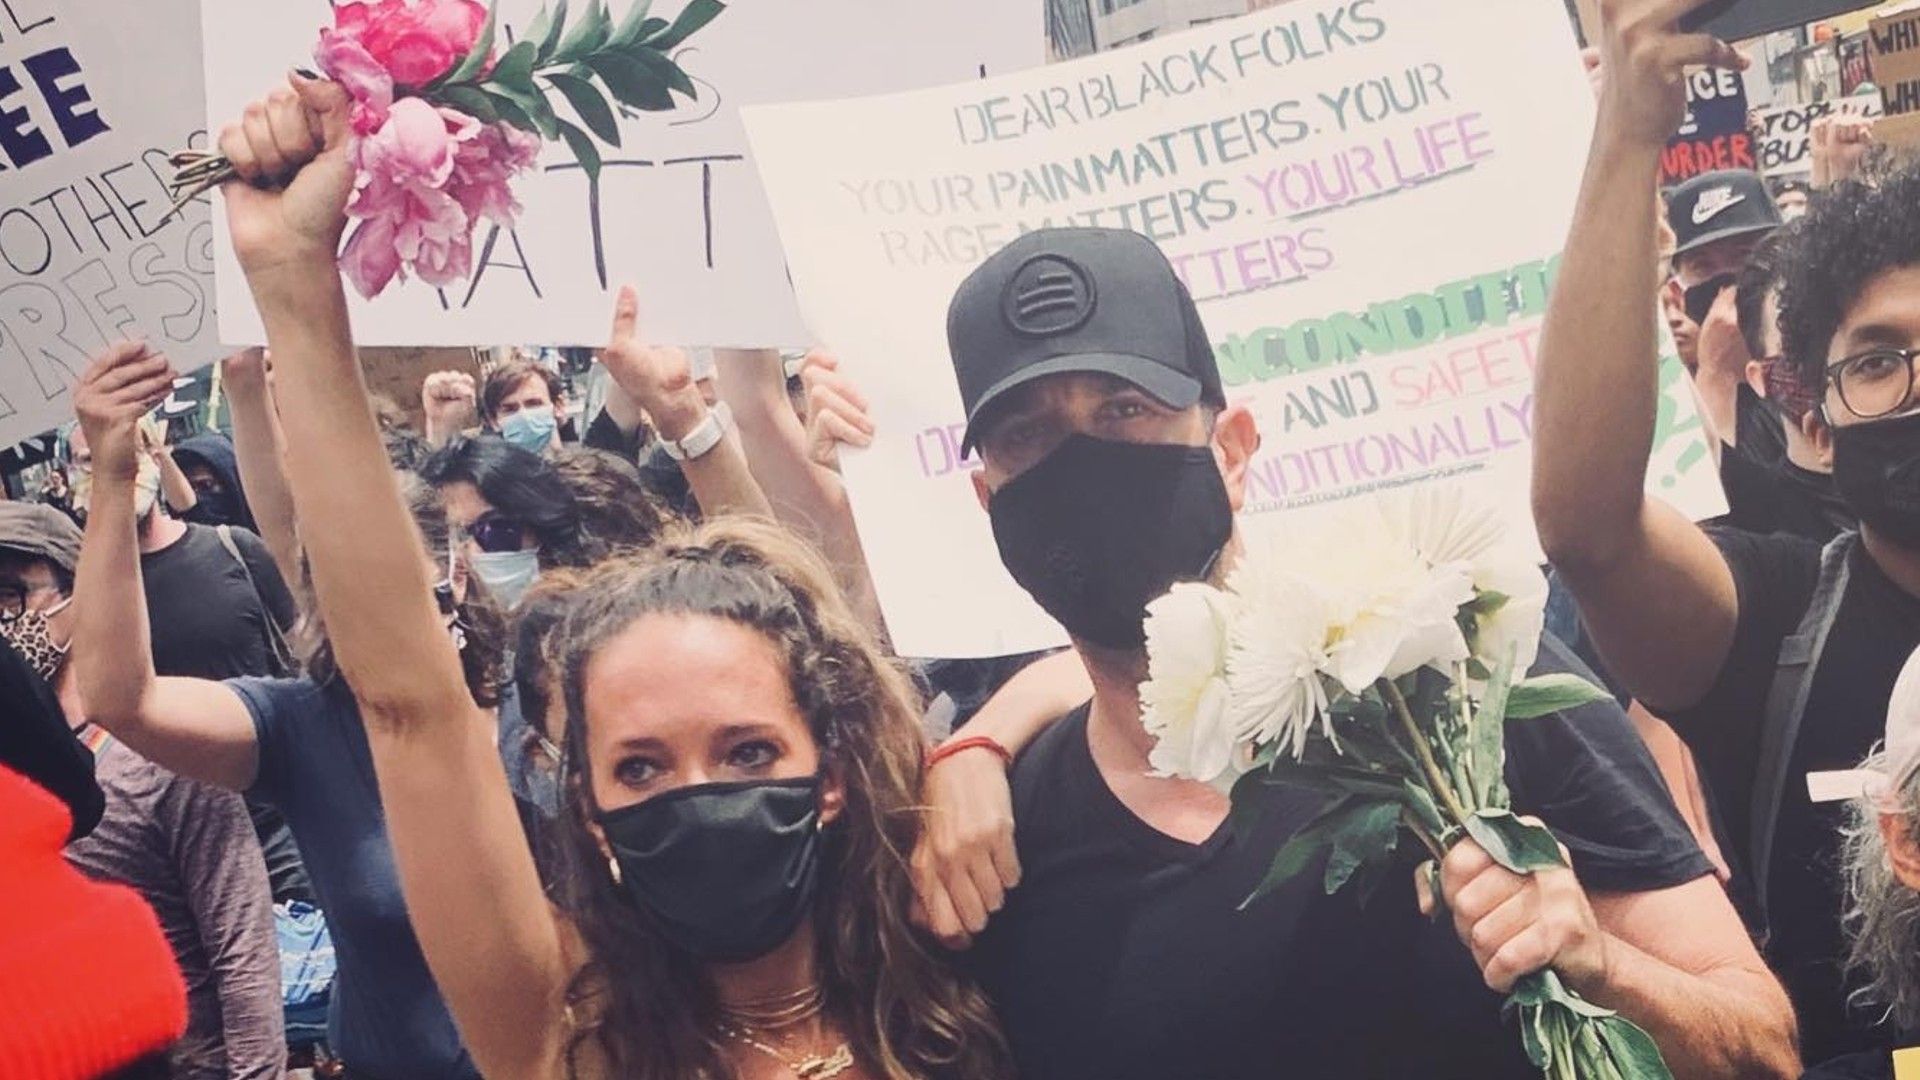 David Schwimmer with his ex-wife at the BLM march